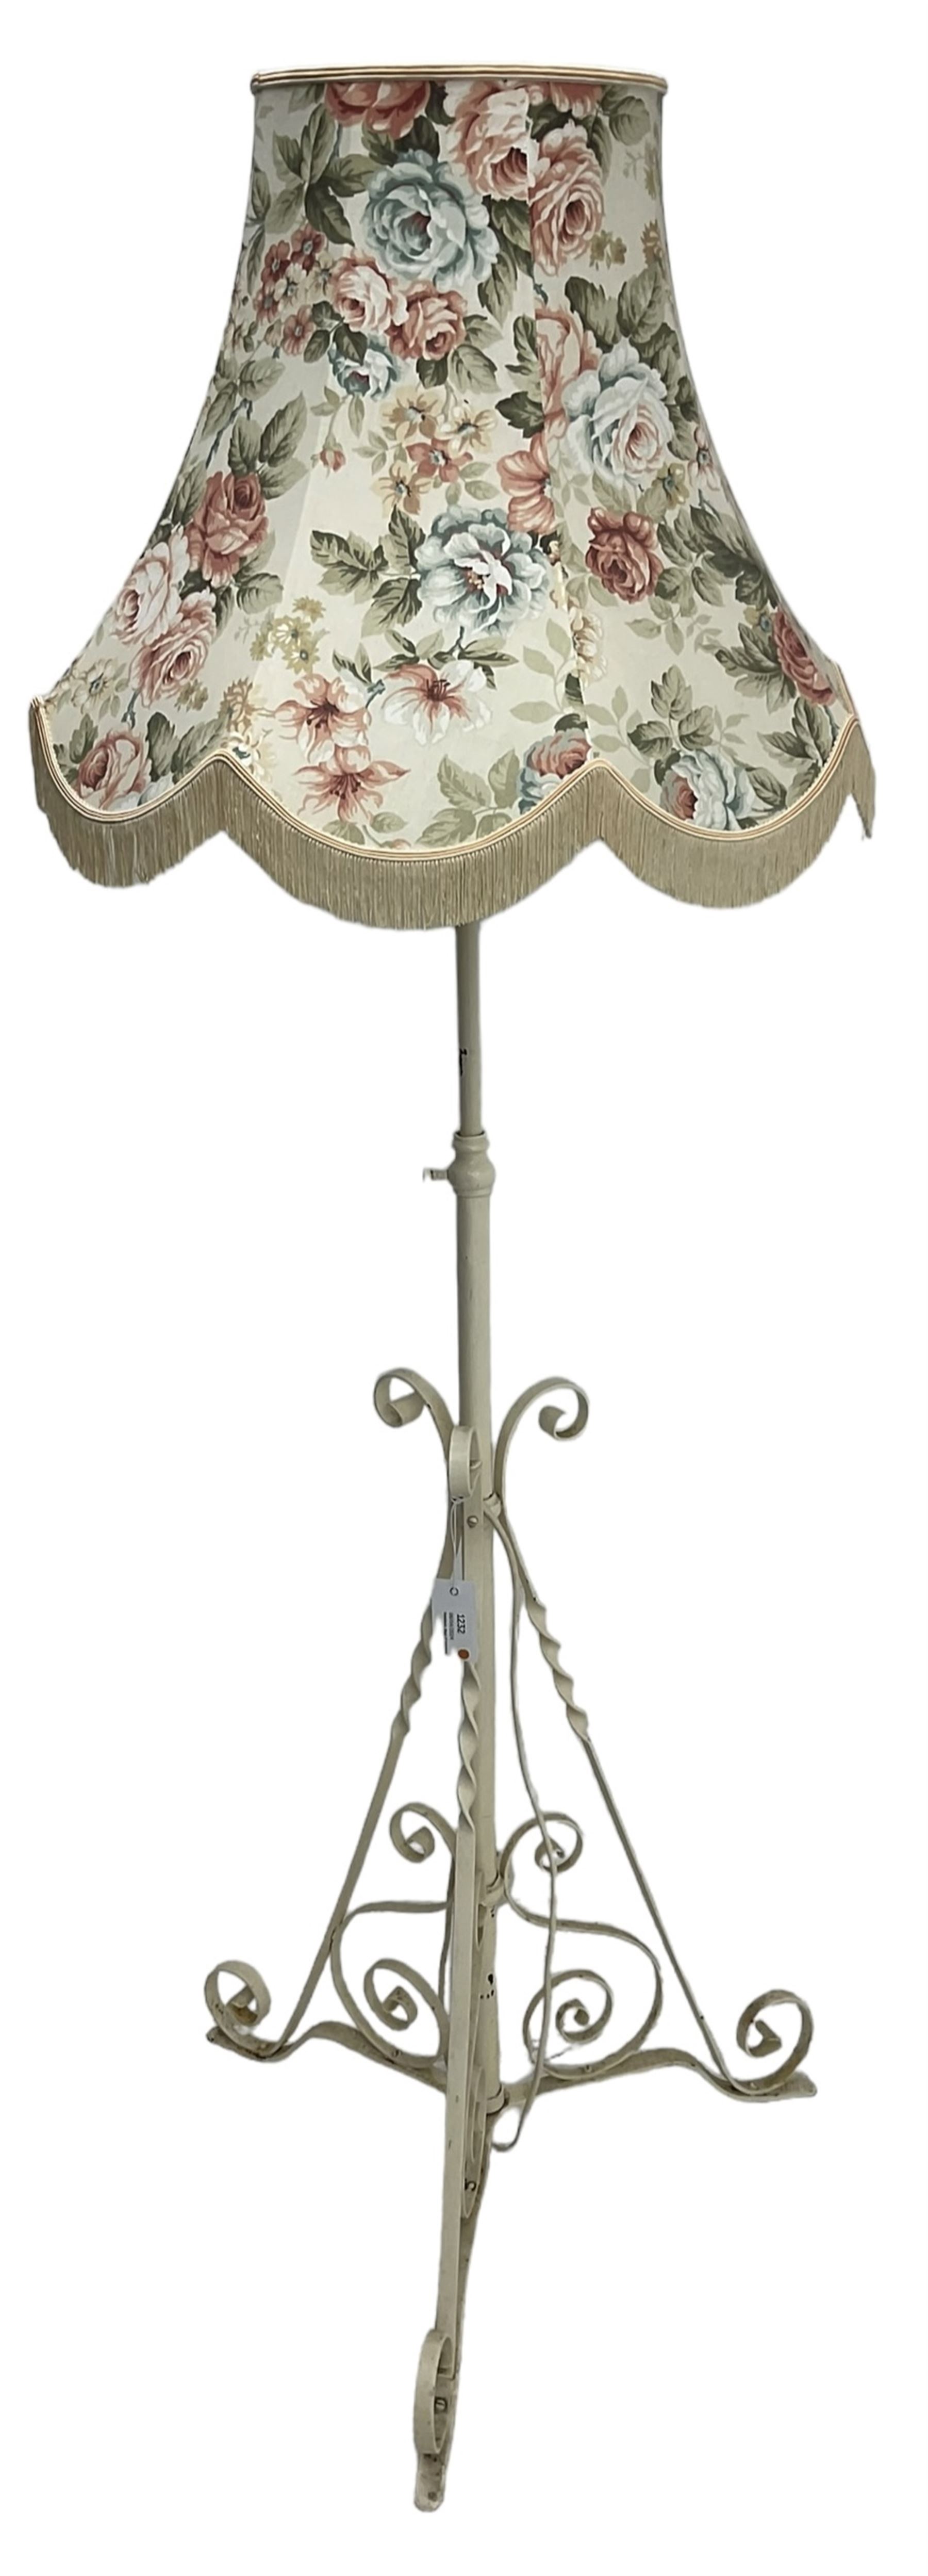 Cream painted wrought iron standard lamp with floral shade - Image 4 of 4